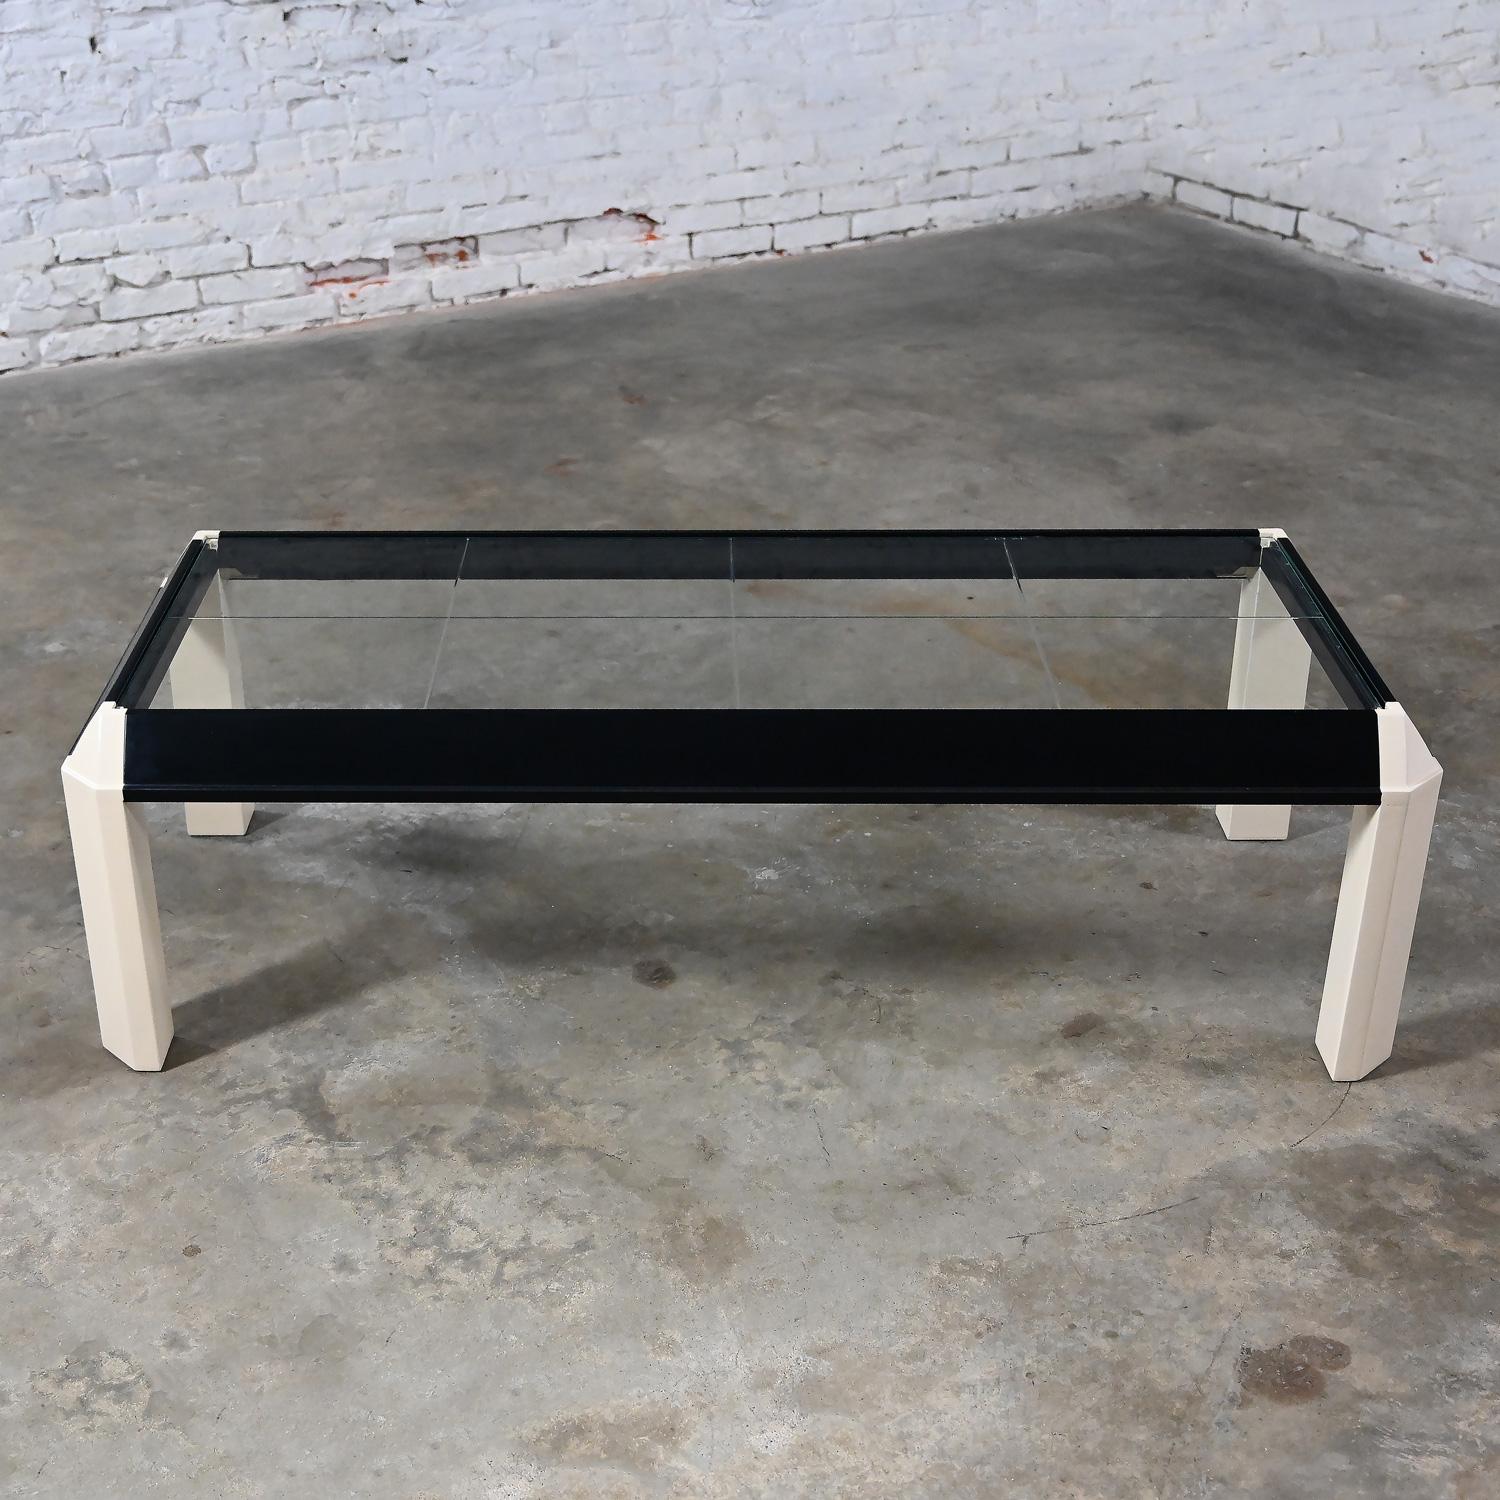 Handsome vintage Modern to Postmodern coffee table with trapezoid shaped legs, recessed glass top, and newly painted off white legs & corners and black painted rails. Beautiful condition, keeping in mind that this is vintage and not new so will have